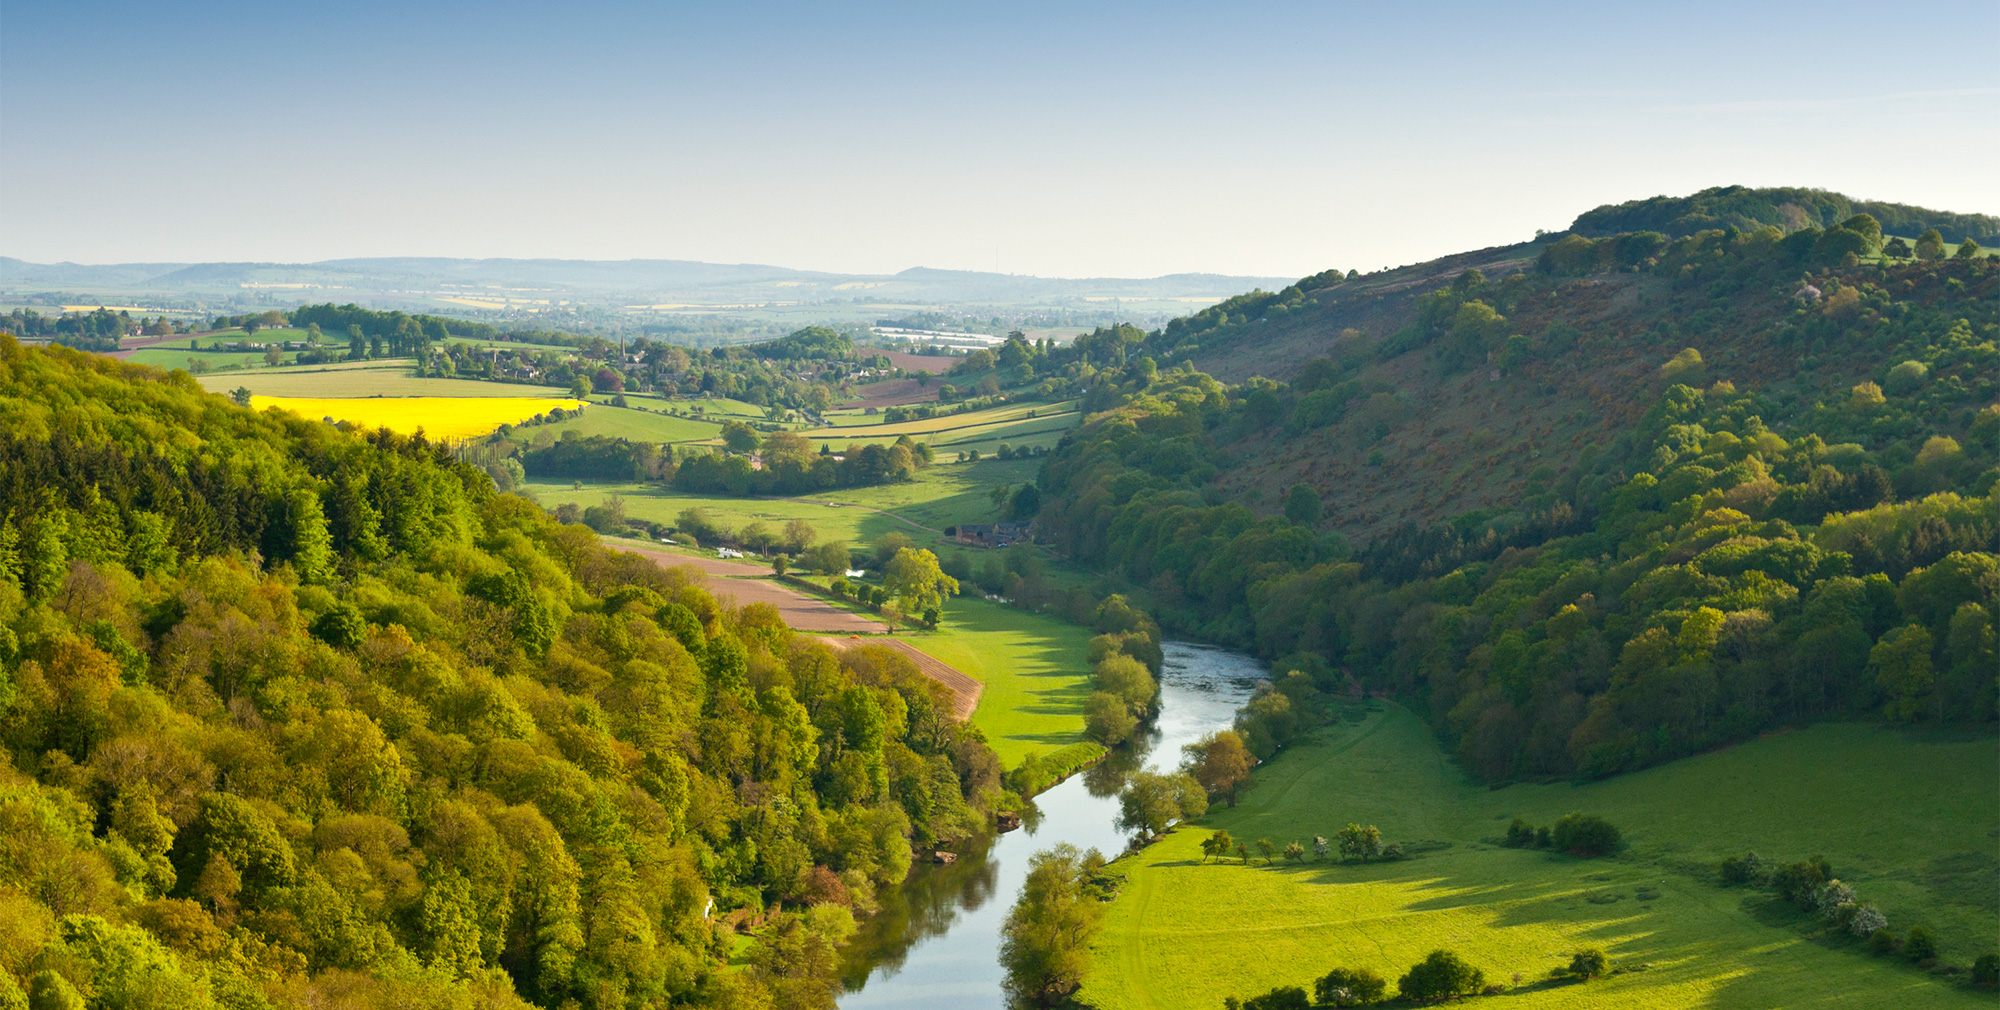 Photo of a river winding through the green British countryside